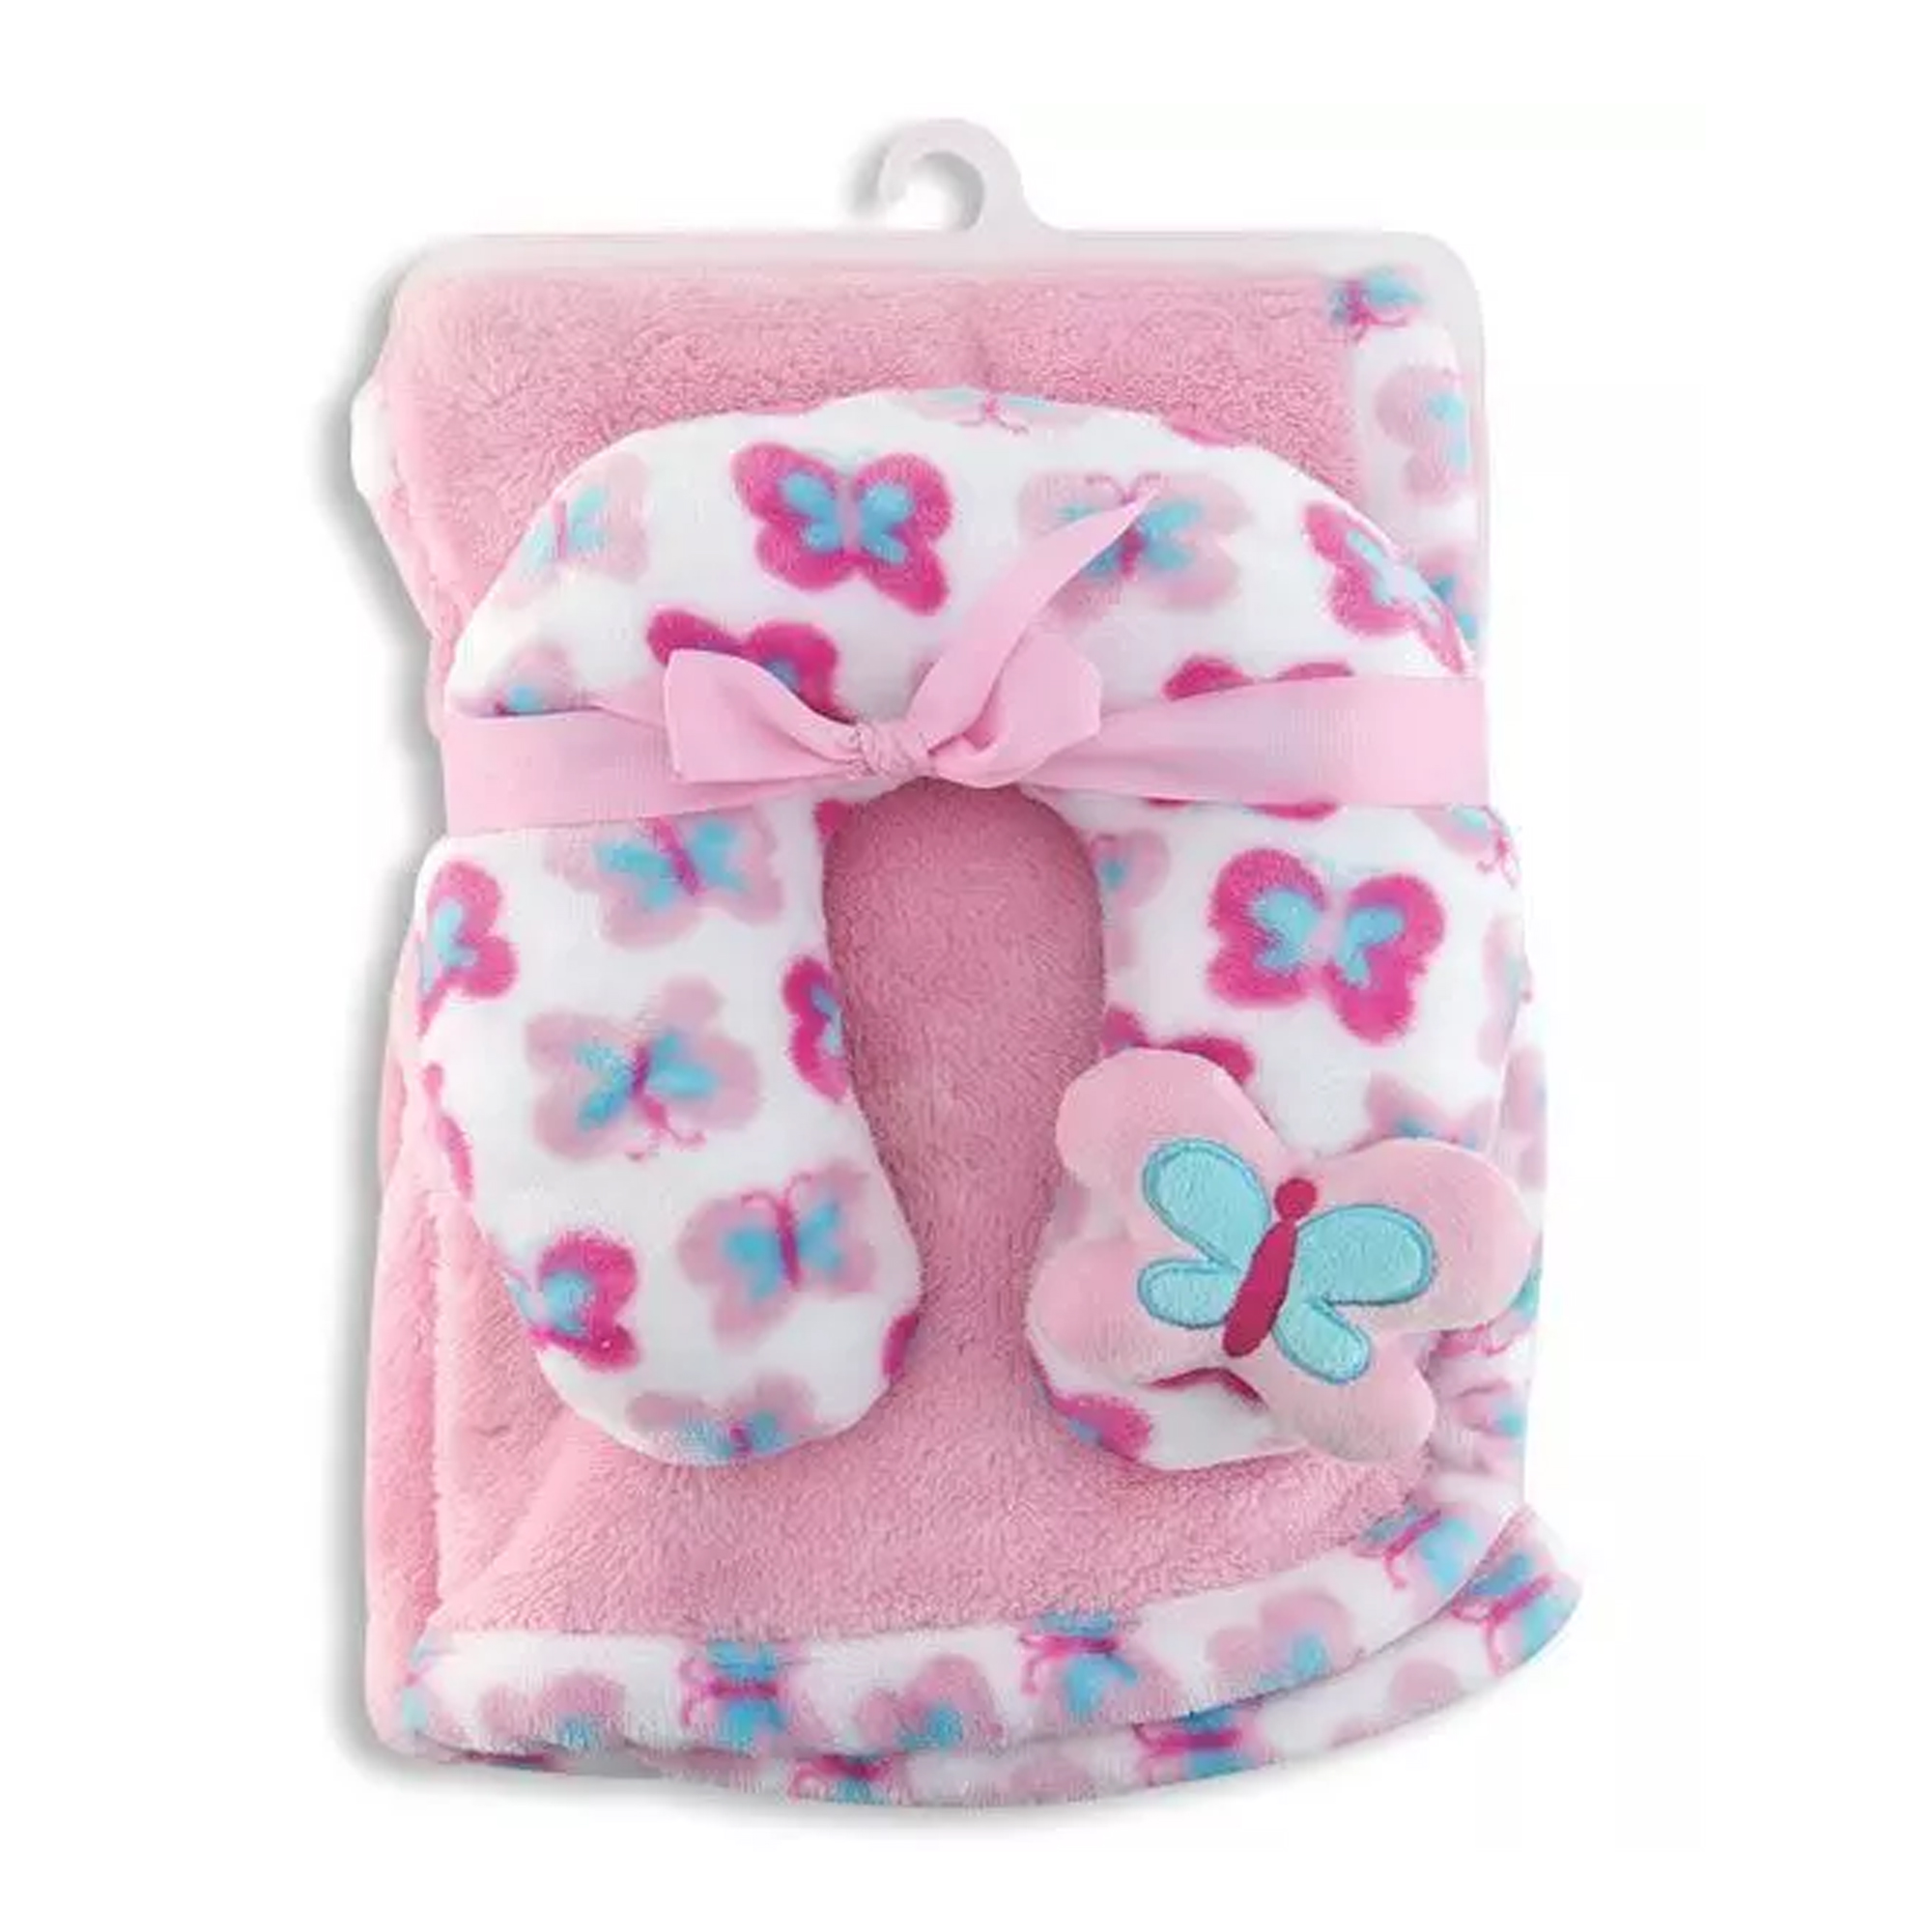 Kelli's Baby Blanket and Neck Support Pillow, Travelling Set for Children